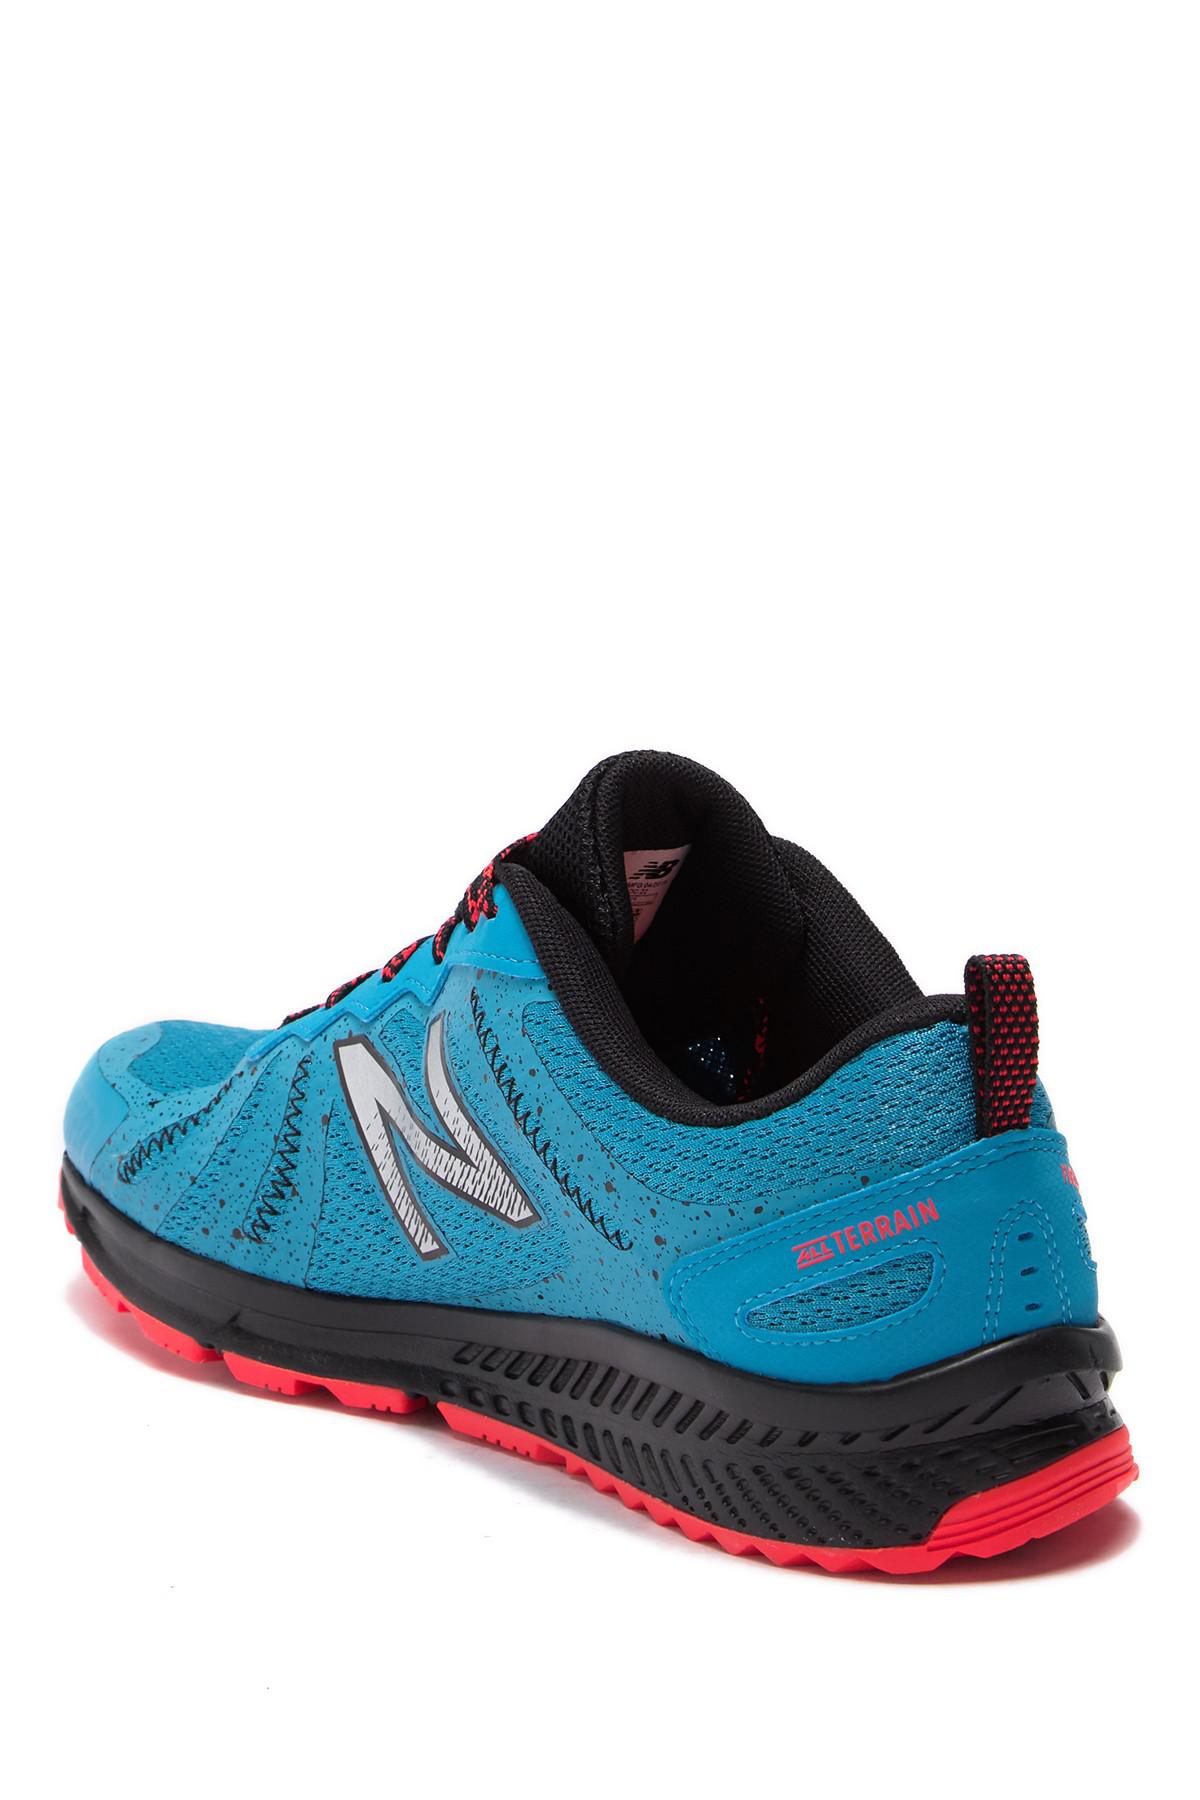 nb fuelcore t590 v4